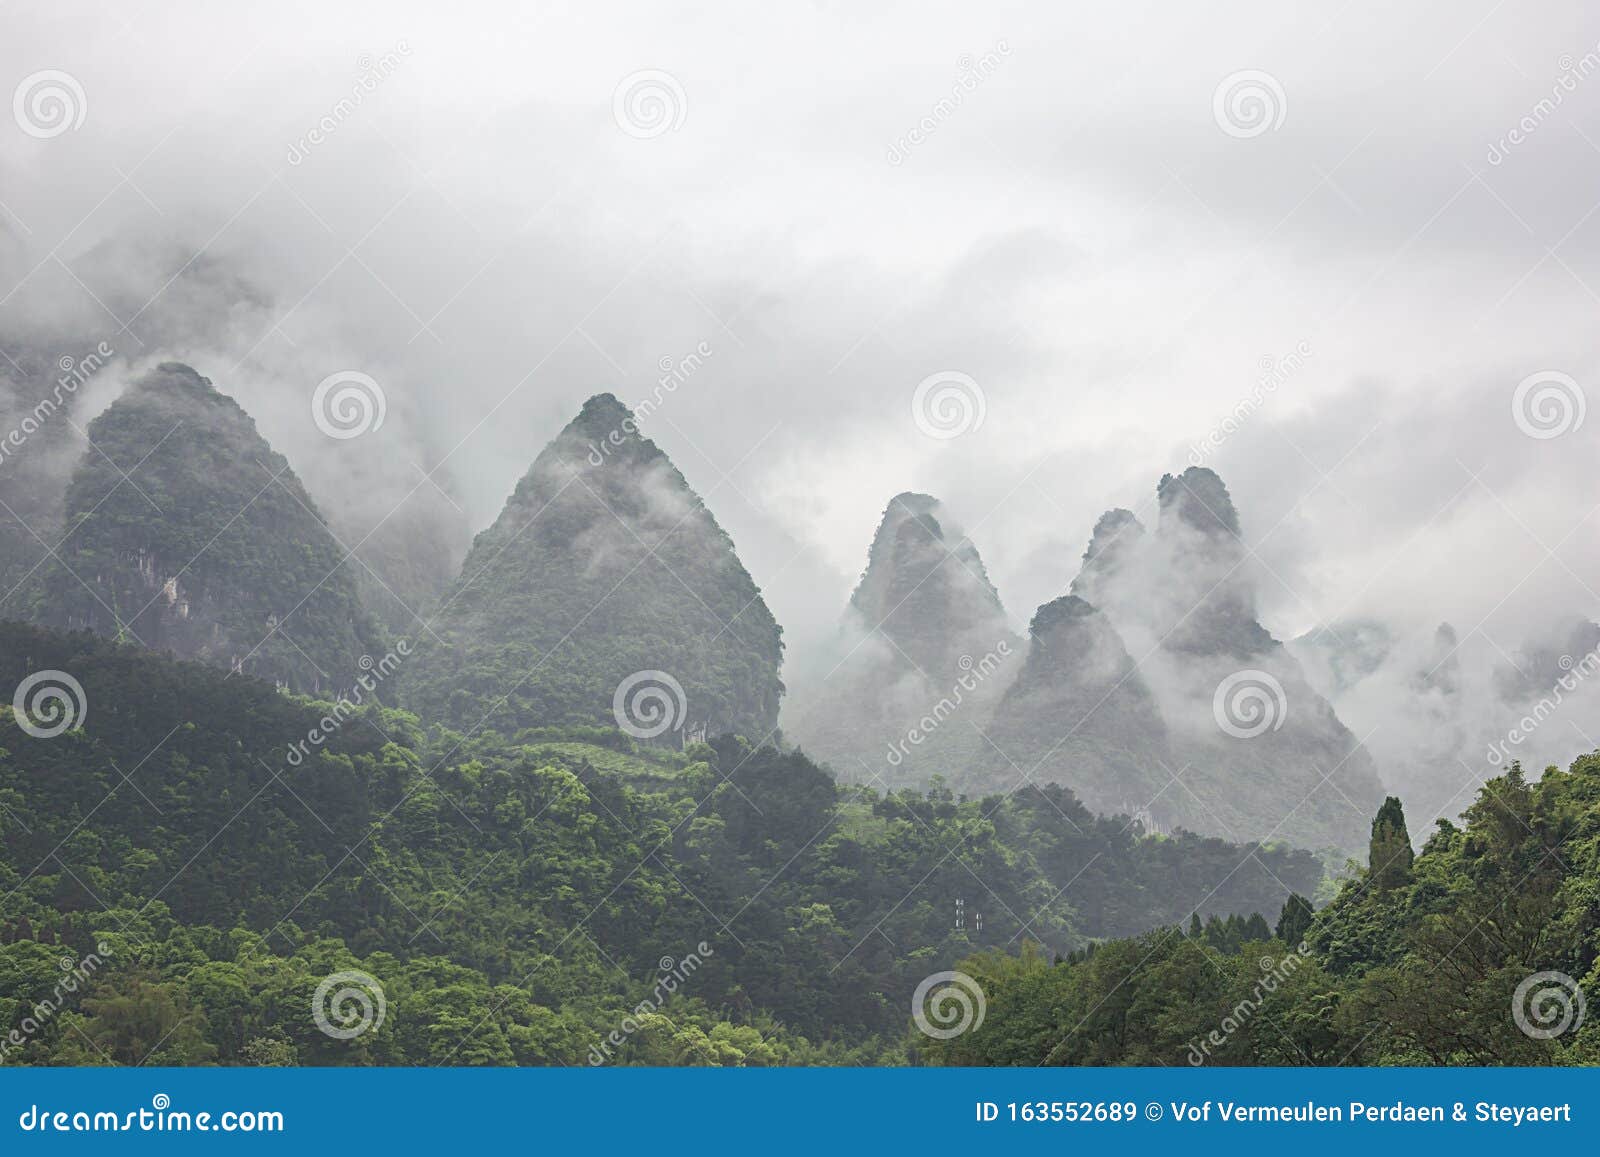 heavy clouds covering the hills bordering the li river